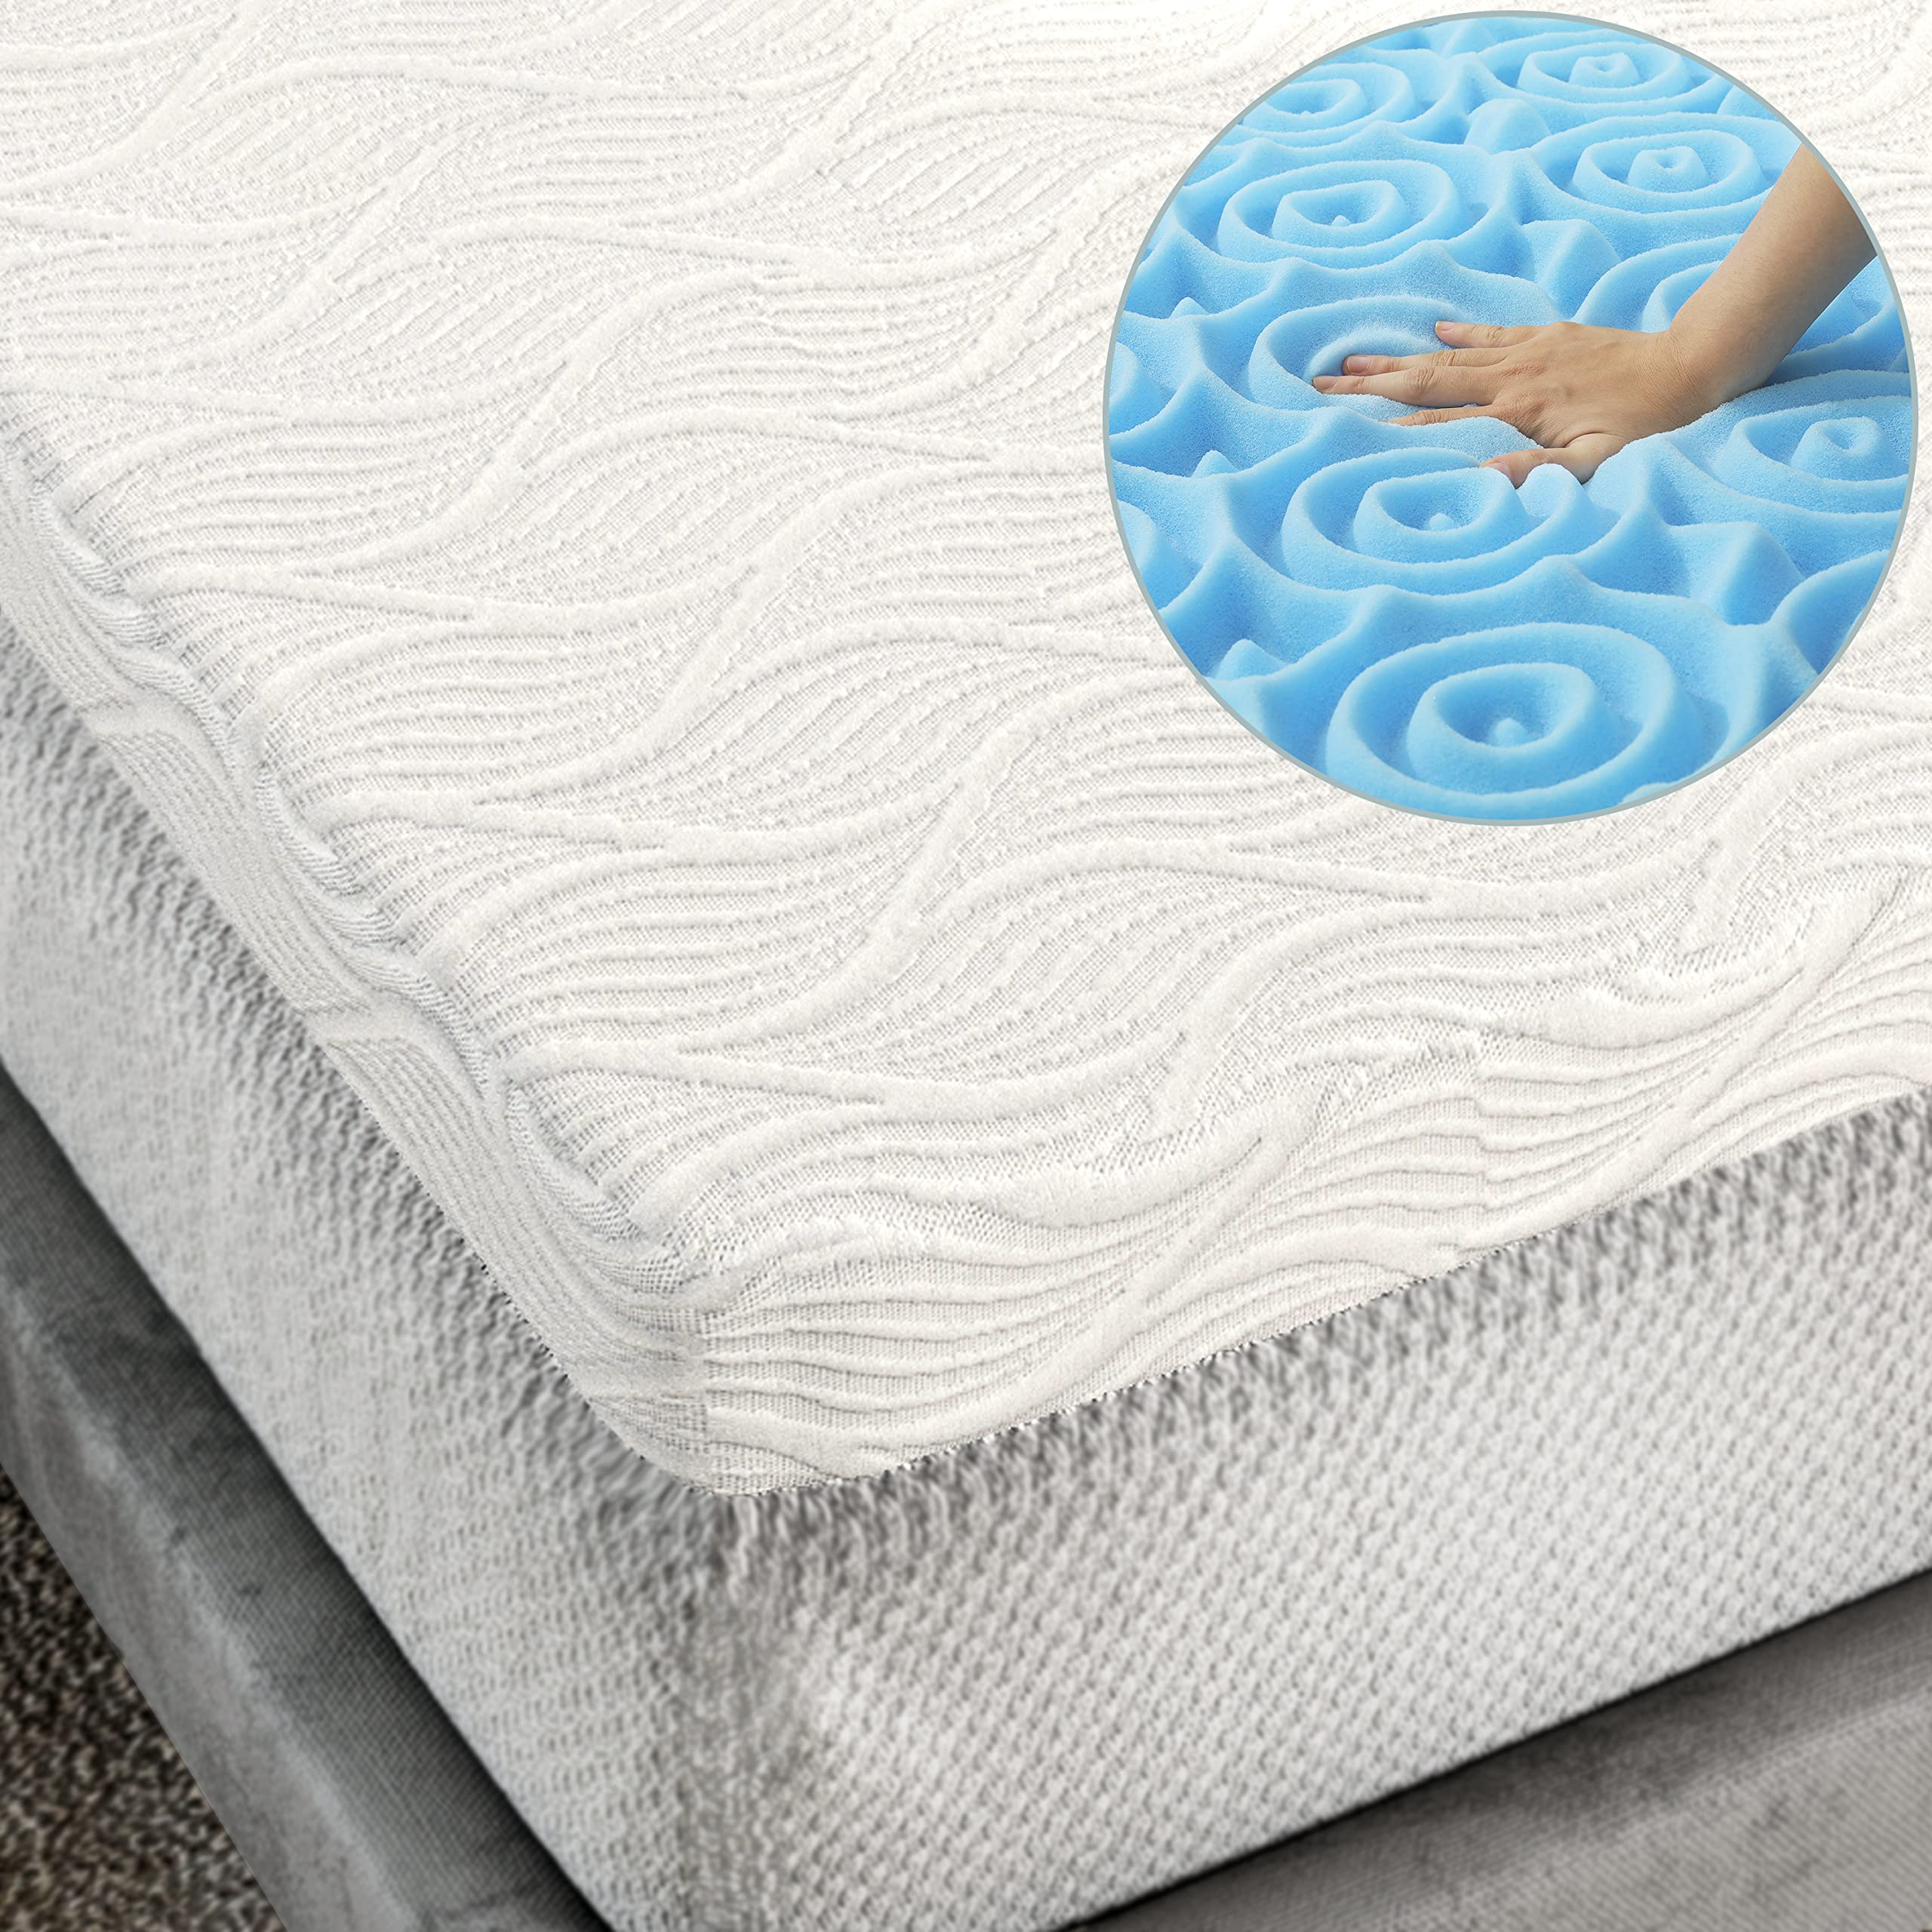 MSmask 7-Zone Memory Foam Mattress Topper 5.5 cm with Removable & Washable Zipped Cover, Pressure Relief for Back Pain Good Sleep, CertiPUR-EU Single Bed (90 x 190)